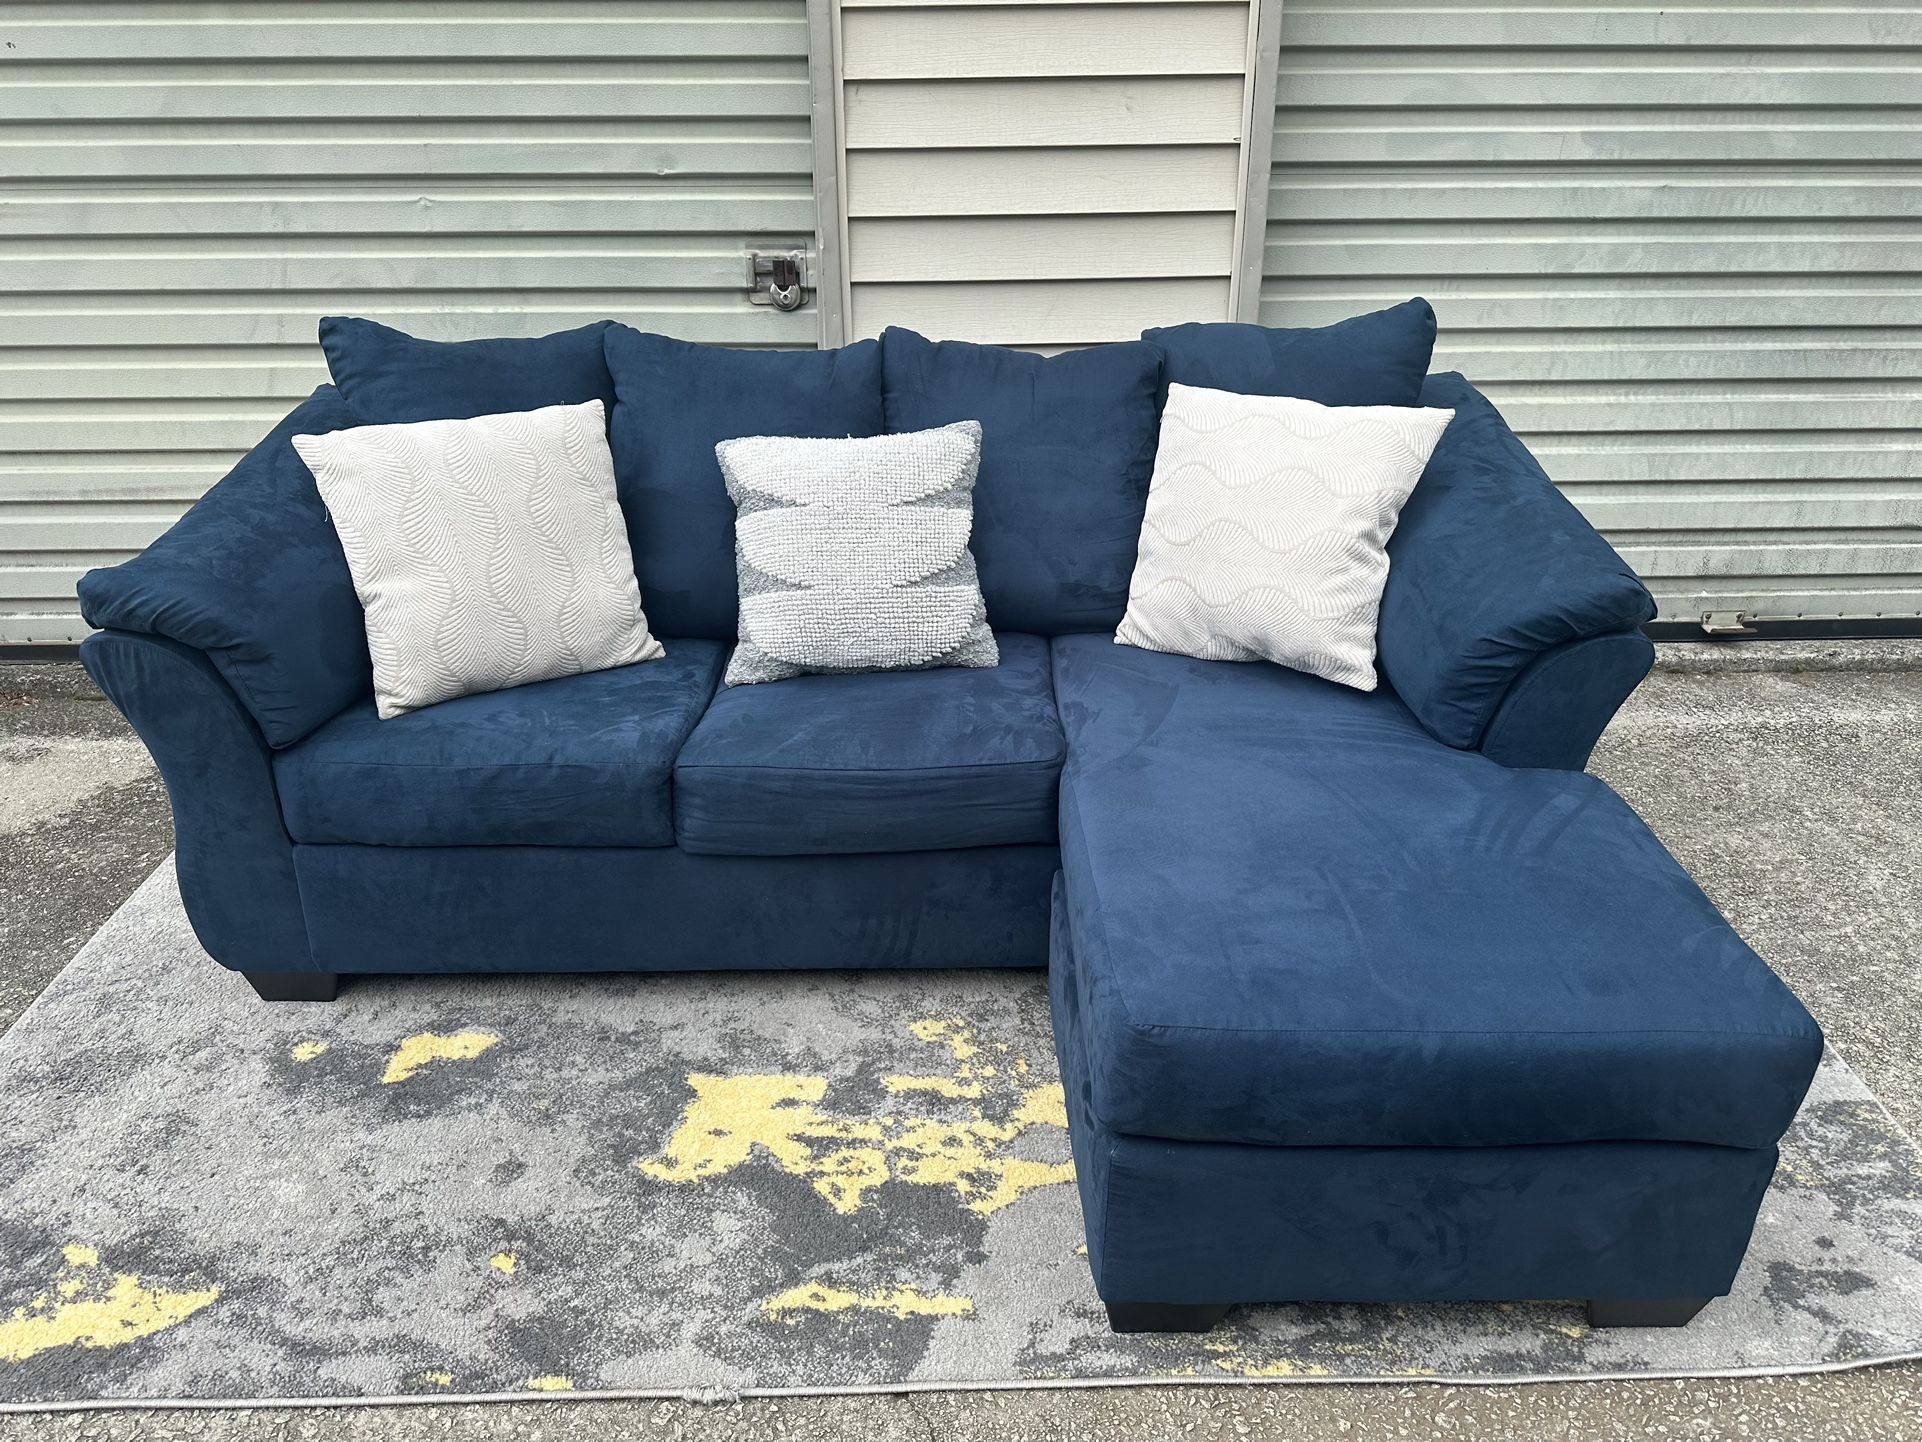 Blue Suade Couch Sectional With Pillows (Delivery Available!)